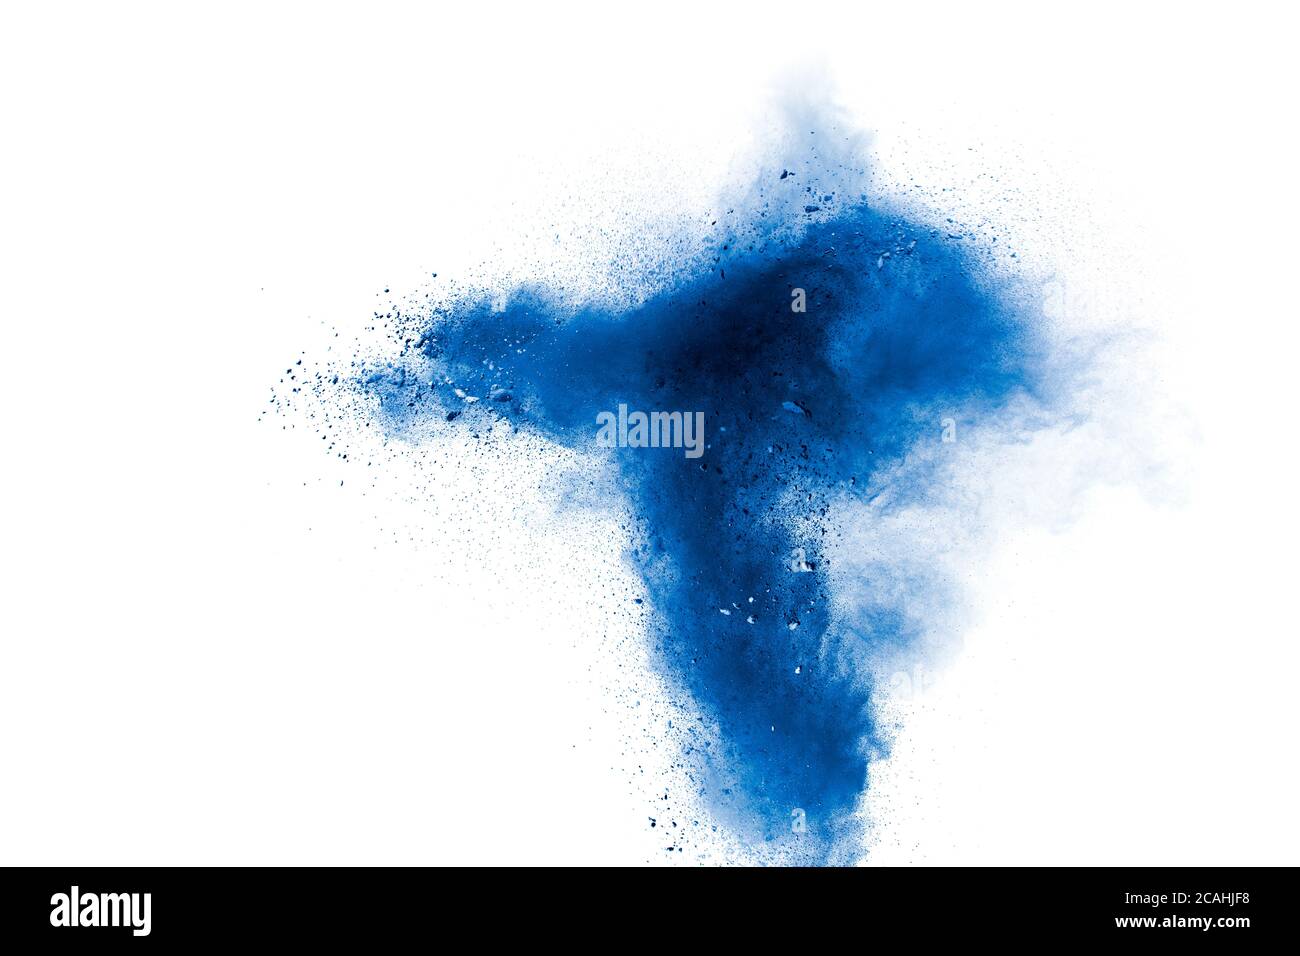 Abstract blue powder explosion on white background. Blue dust particles splash. Stock Photo